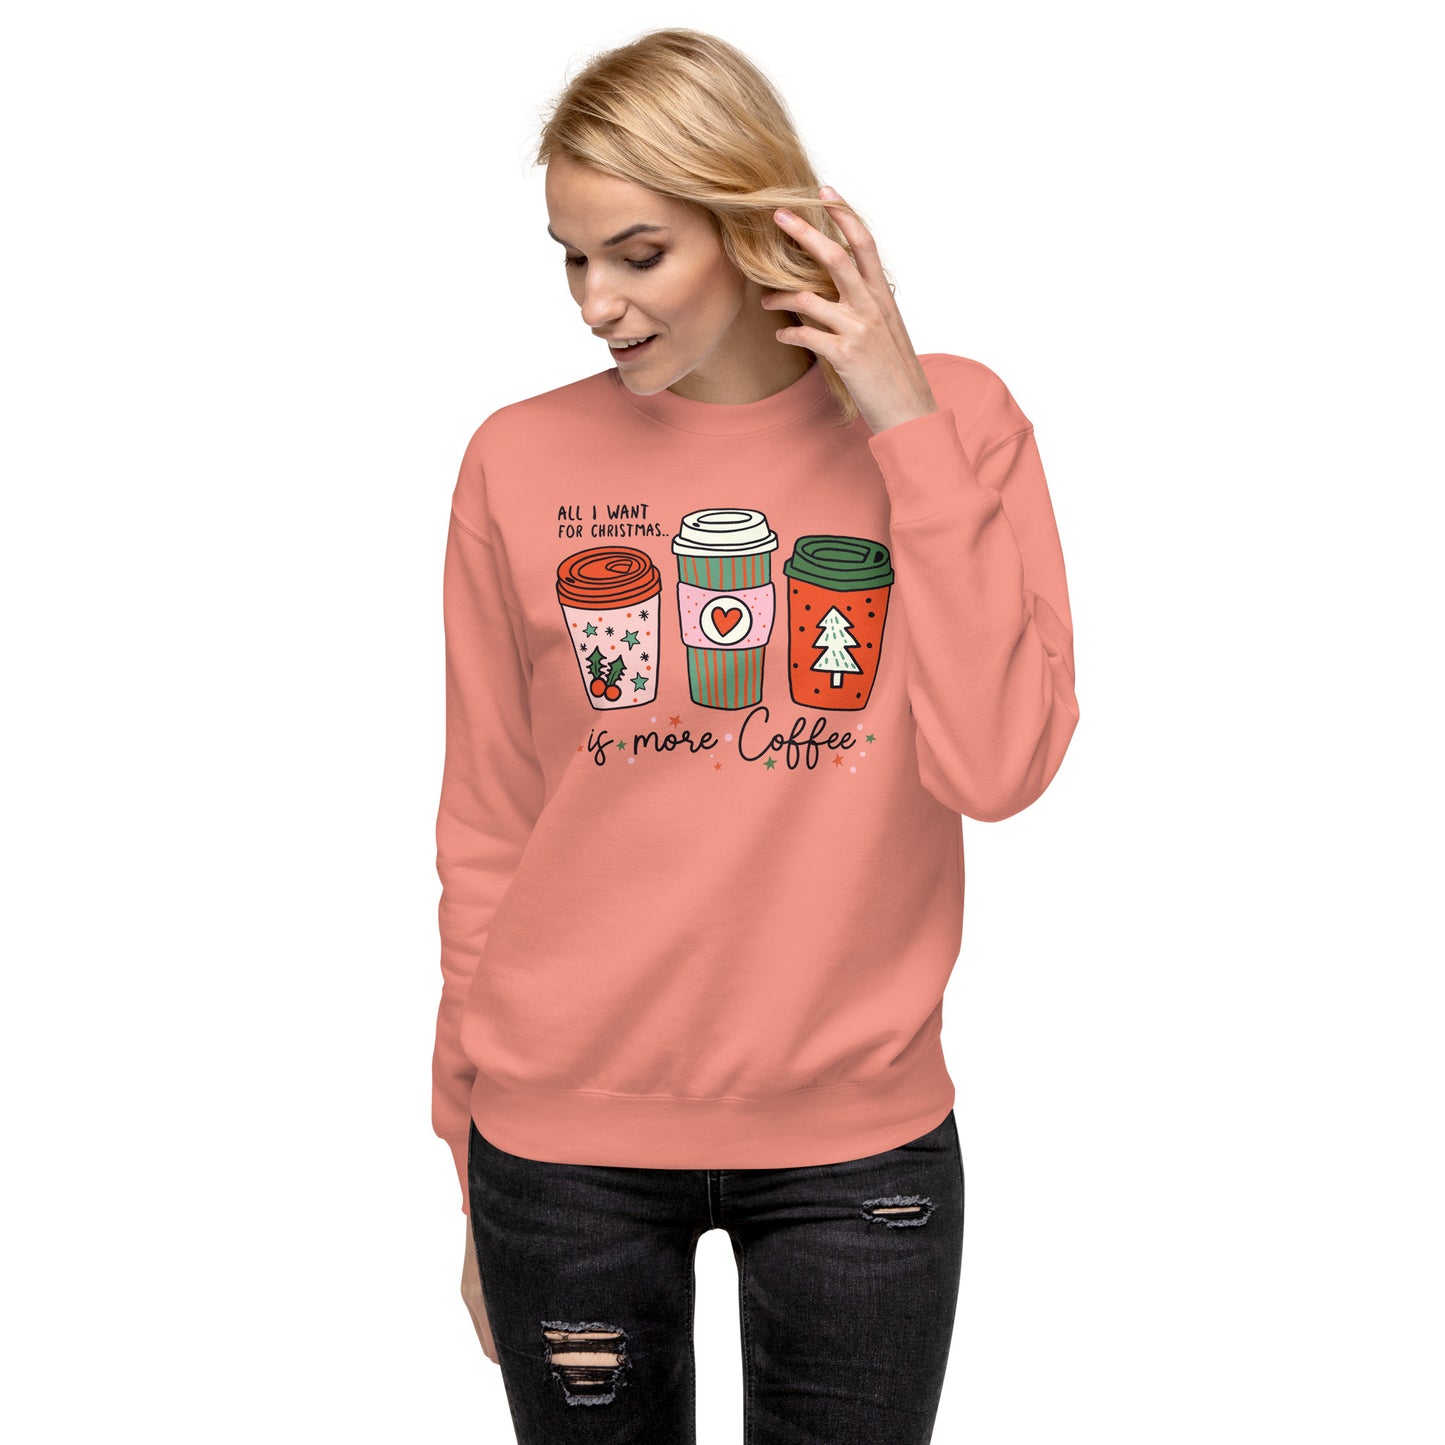 All I Want For Christmas Is More Coffee Holiday Unisex Premium Sweatshirt